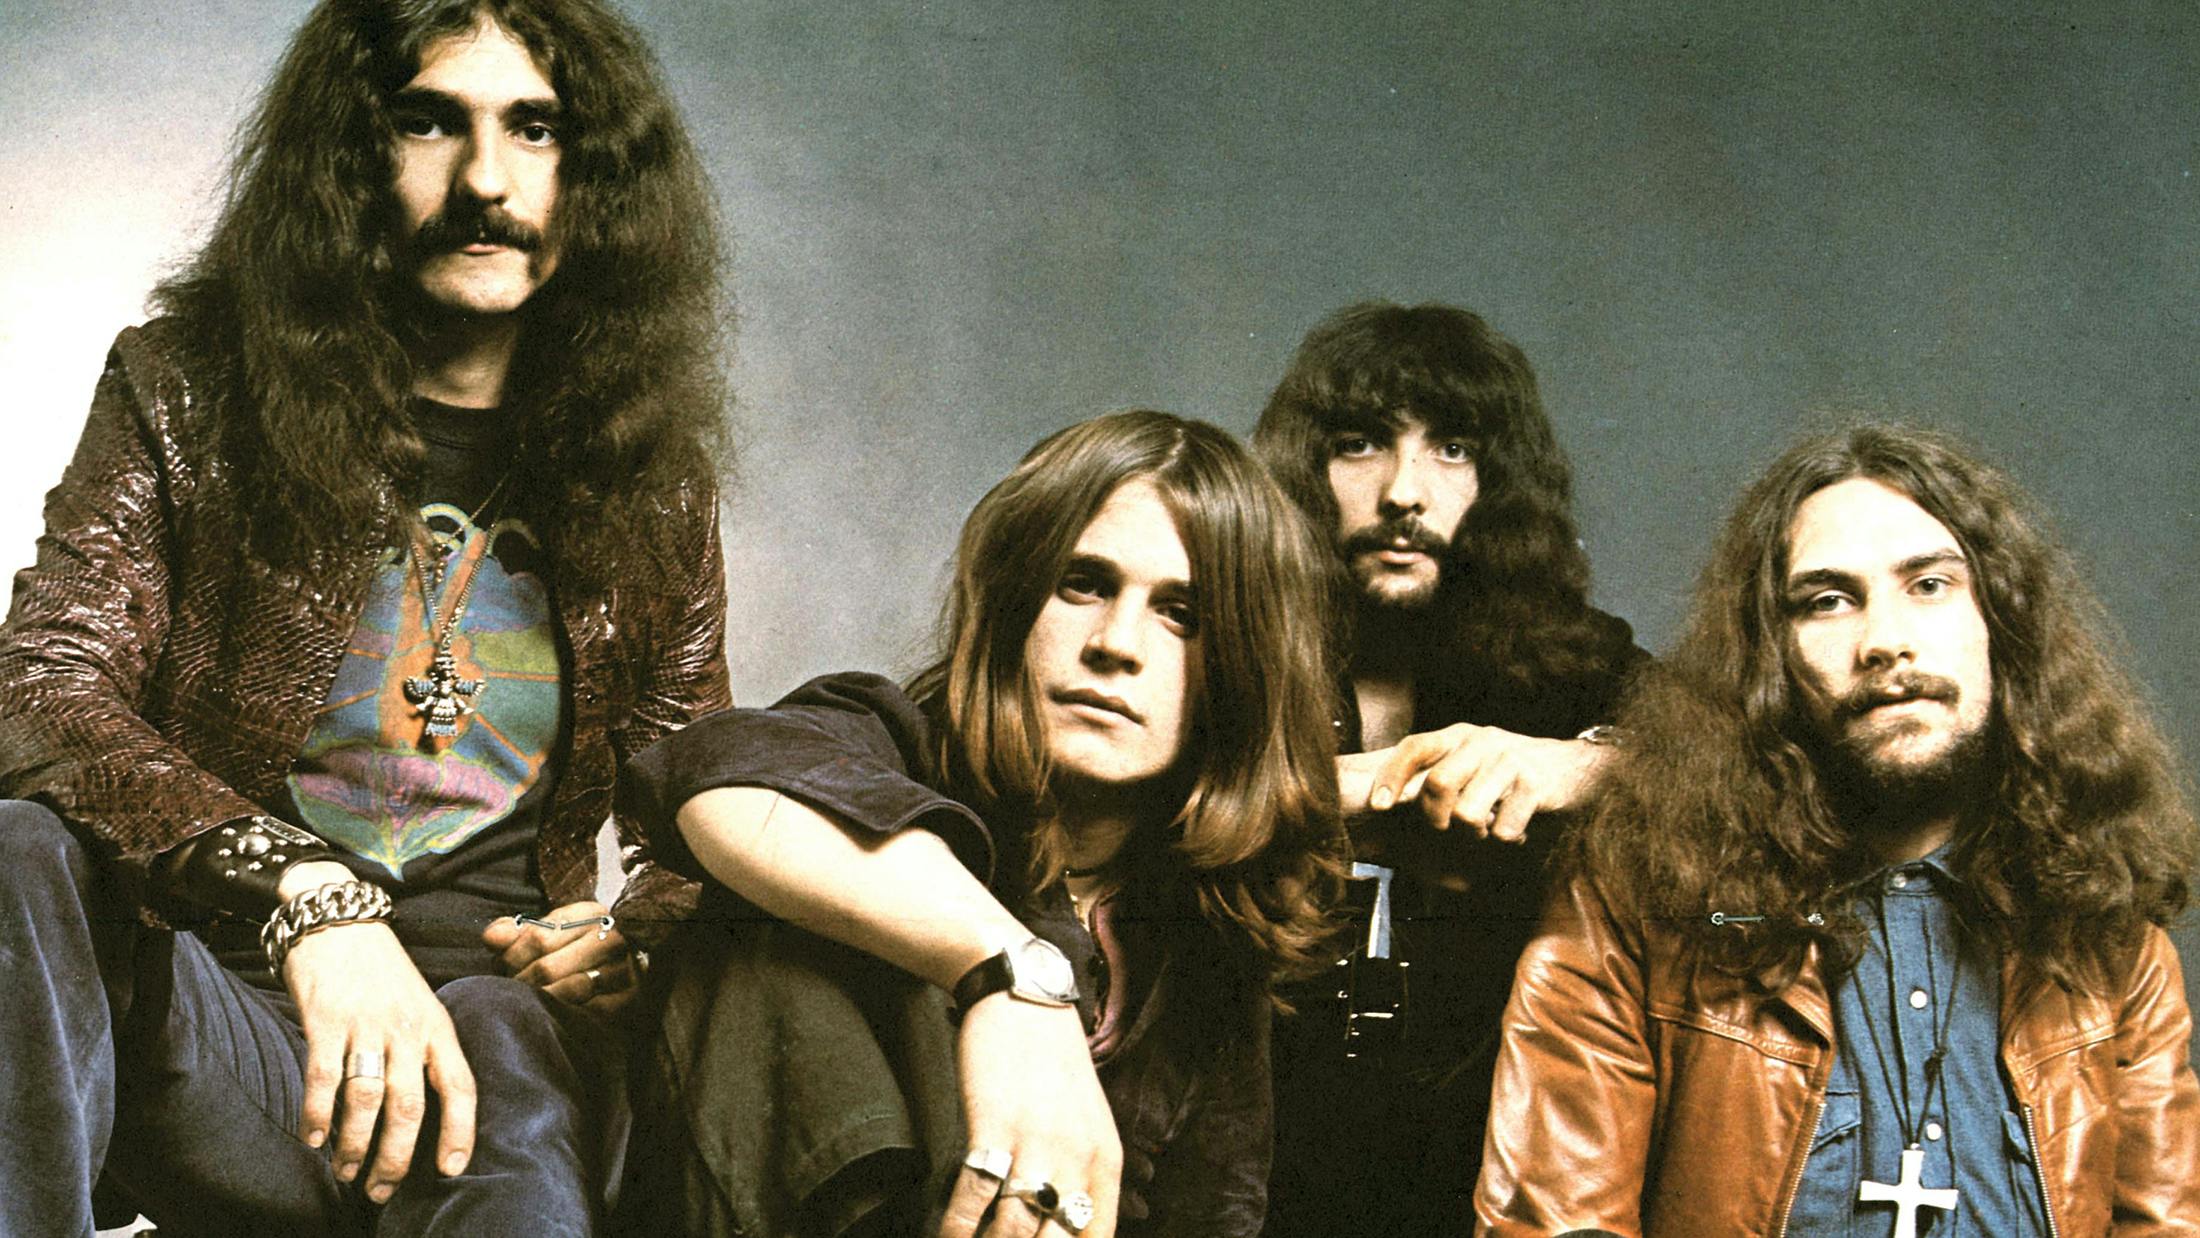 The Story Of Black Sabbath As Told Through Their Singles – Part 2